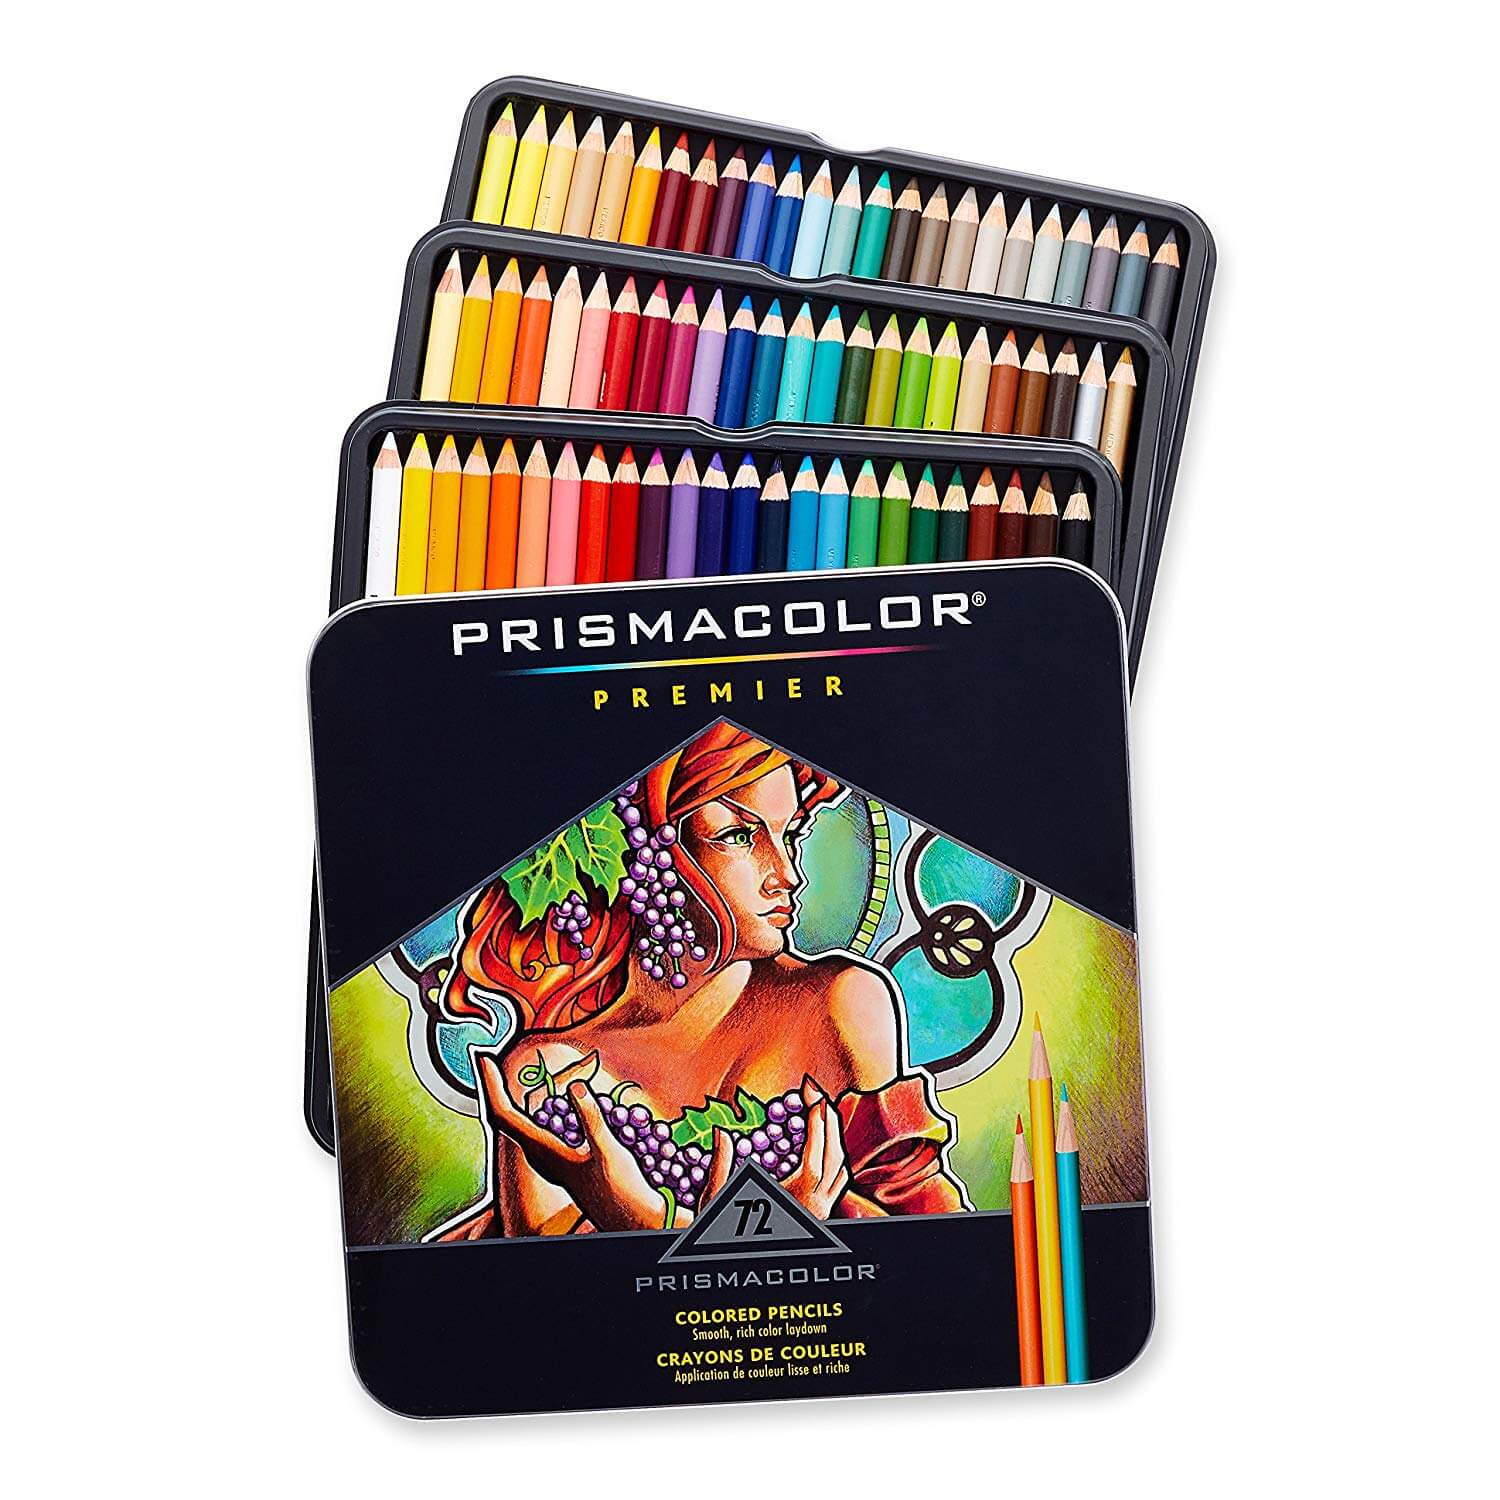  SJ STAR-JOY 72 Colored Pencils for Adult Coloring Books,  Premier Coloring Pencils Set, Quality Oil Based Colored Pencils, Holiday Gifts  for Artist Drawing : Arts, Crafts & Sewing